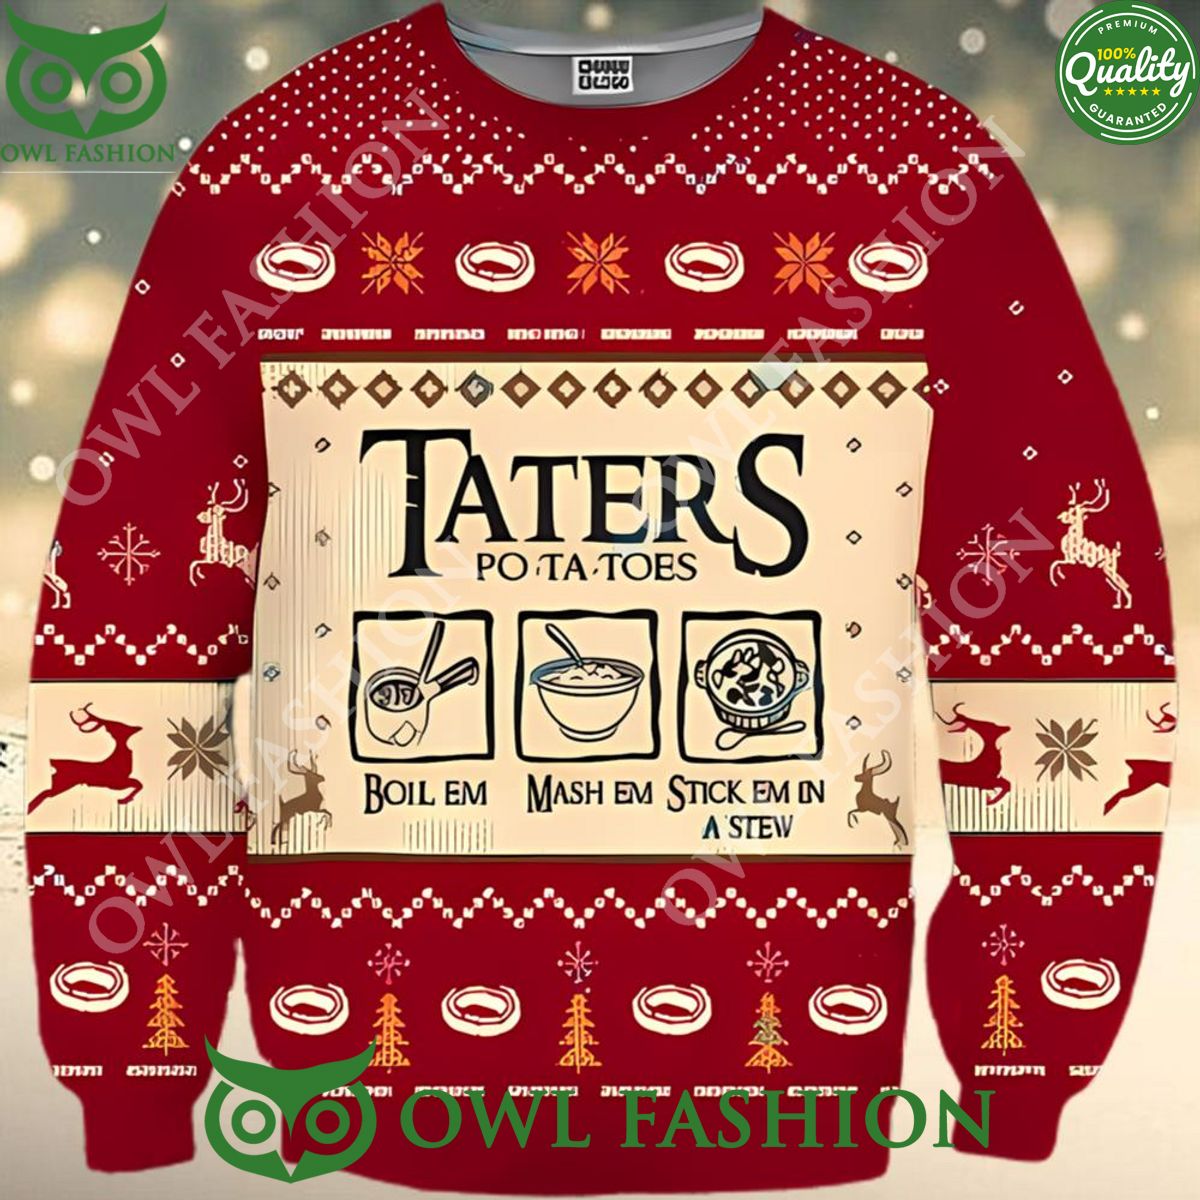 lord of the rings taters potatoes red ugly christmas sweater jumper 1 Qqdjh.jpg